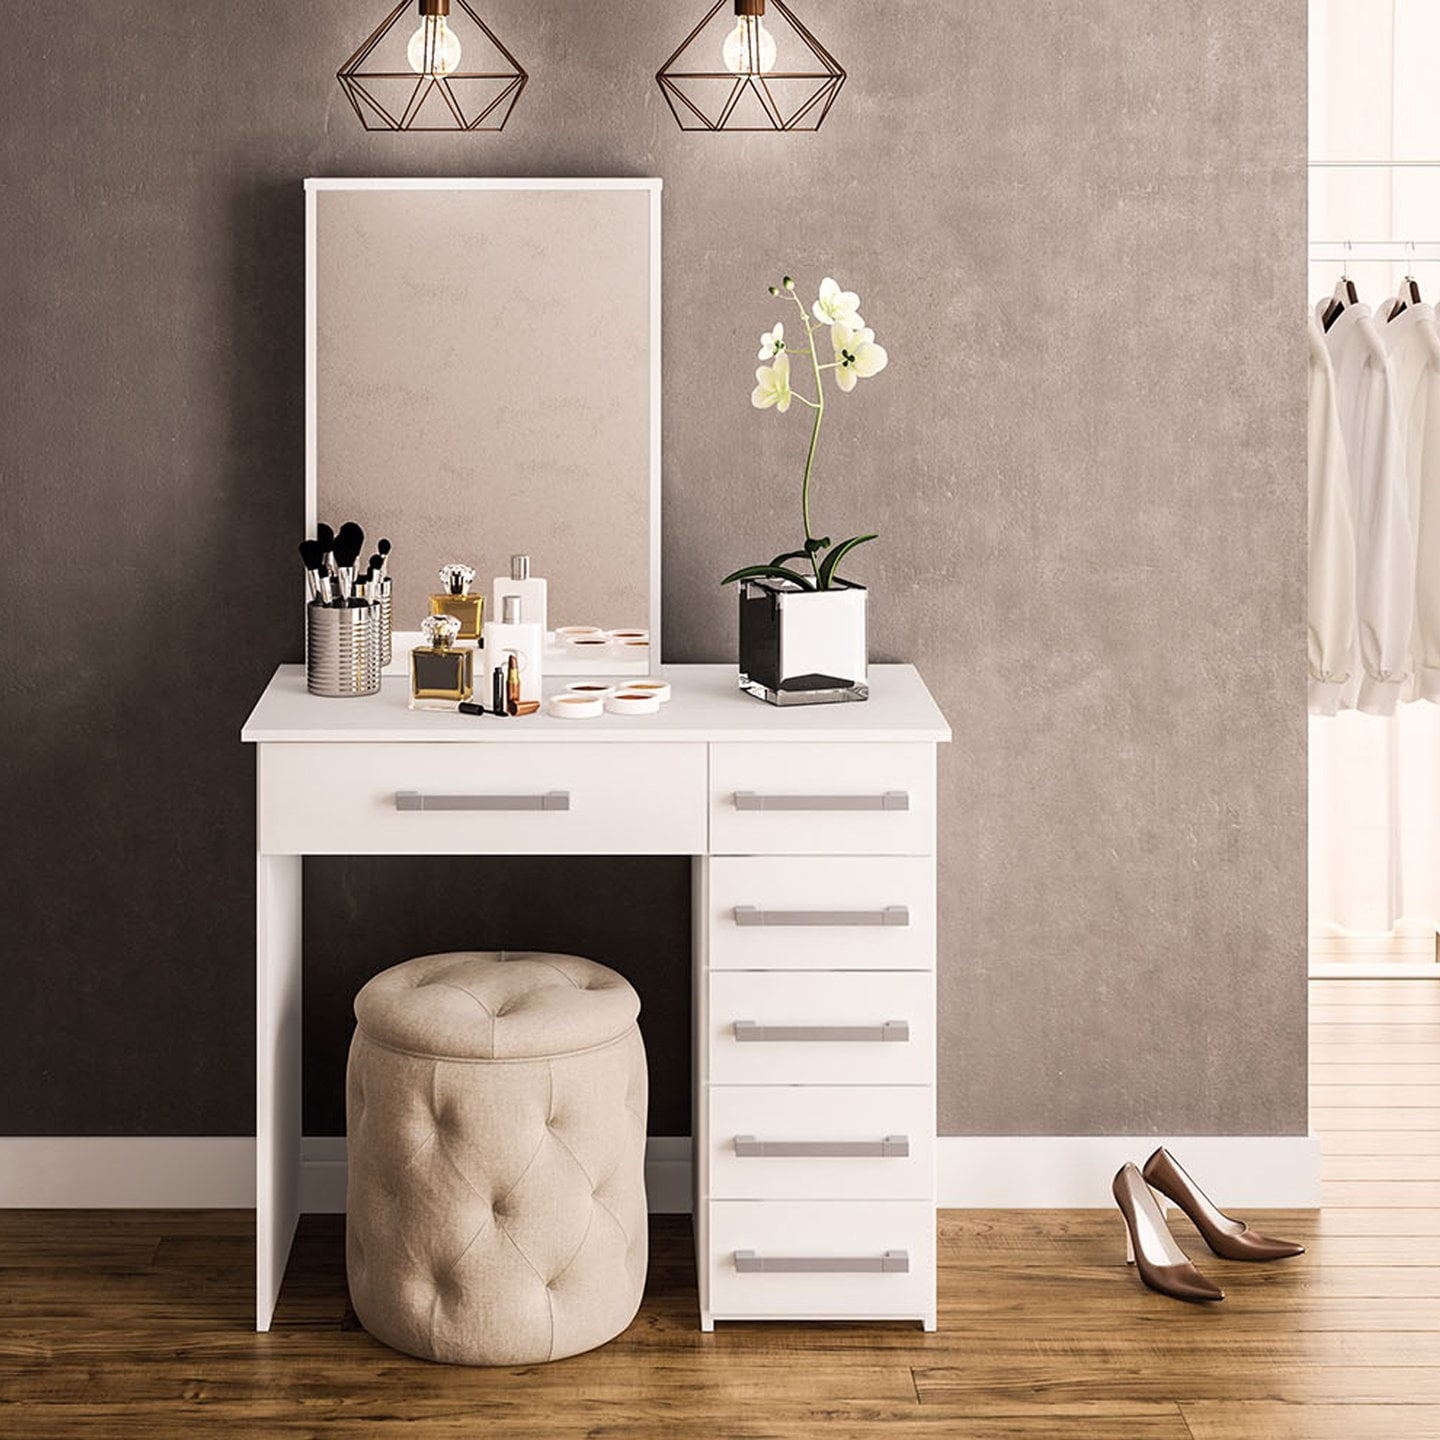 Boahaus Sofia Modern Vanity Table With, The Vanity Set